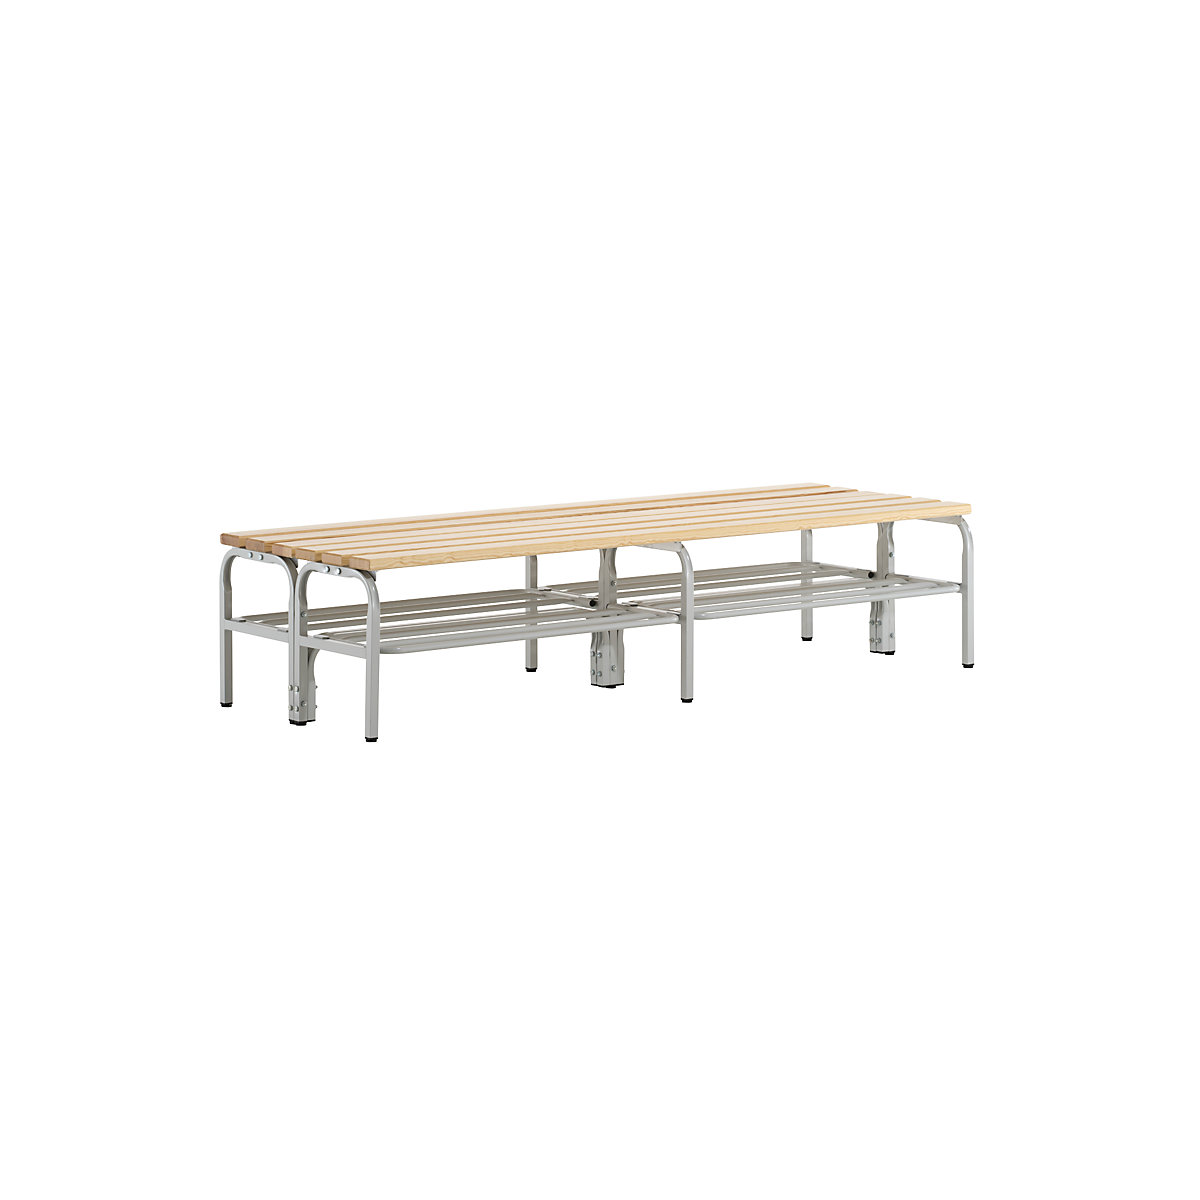 Sypro – Cloakroom bench, double sided, pine wood slats, length 1500 mm, with shoe rack